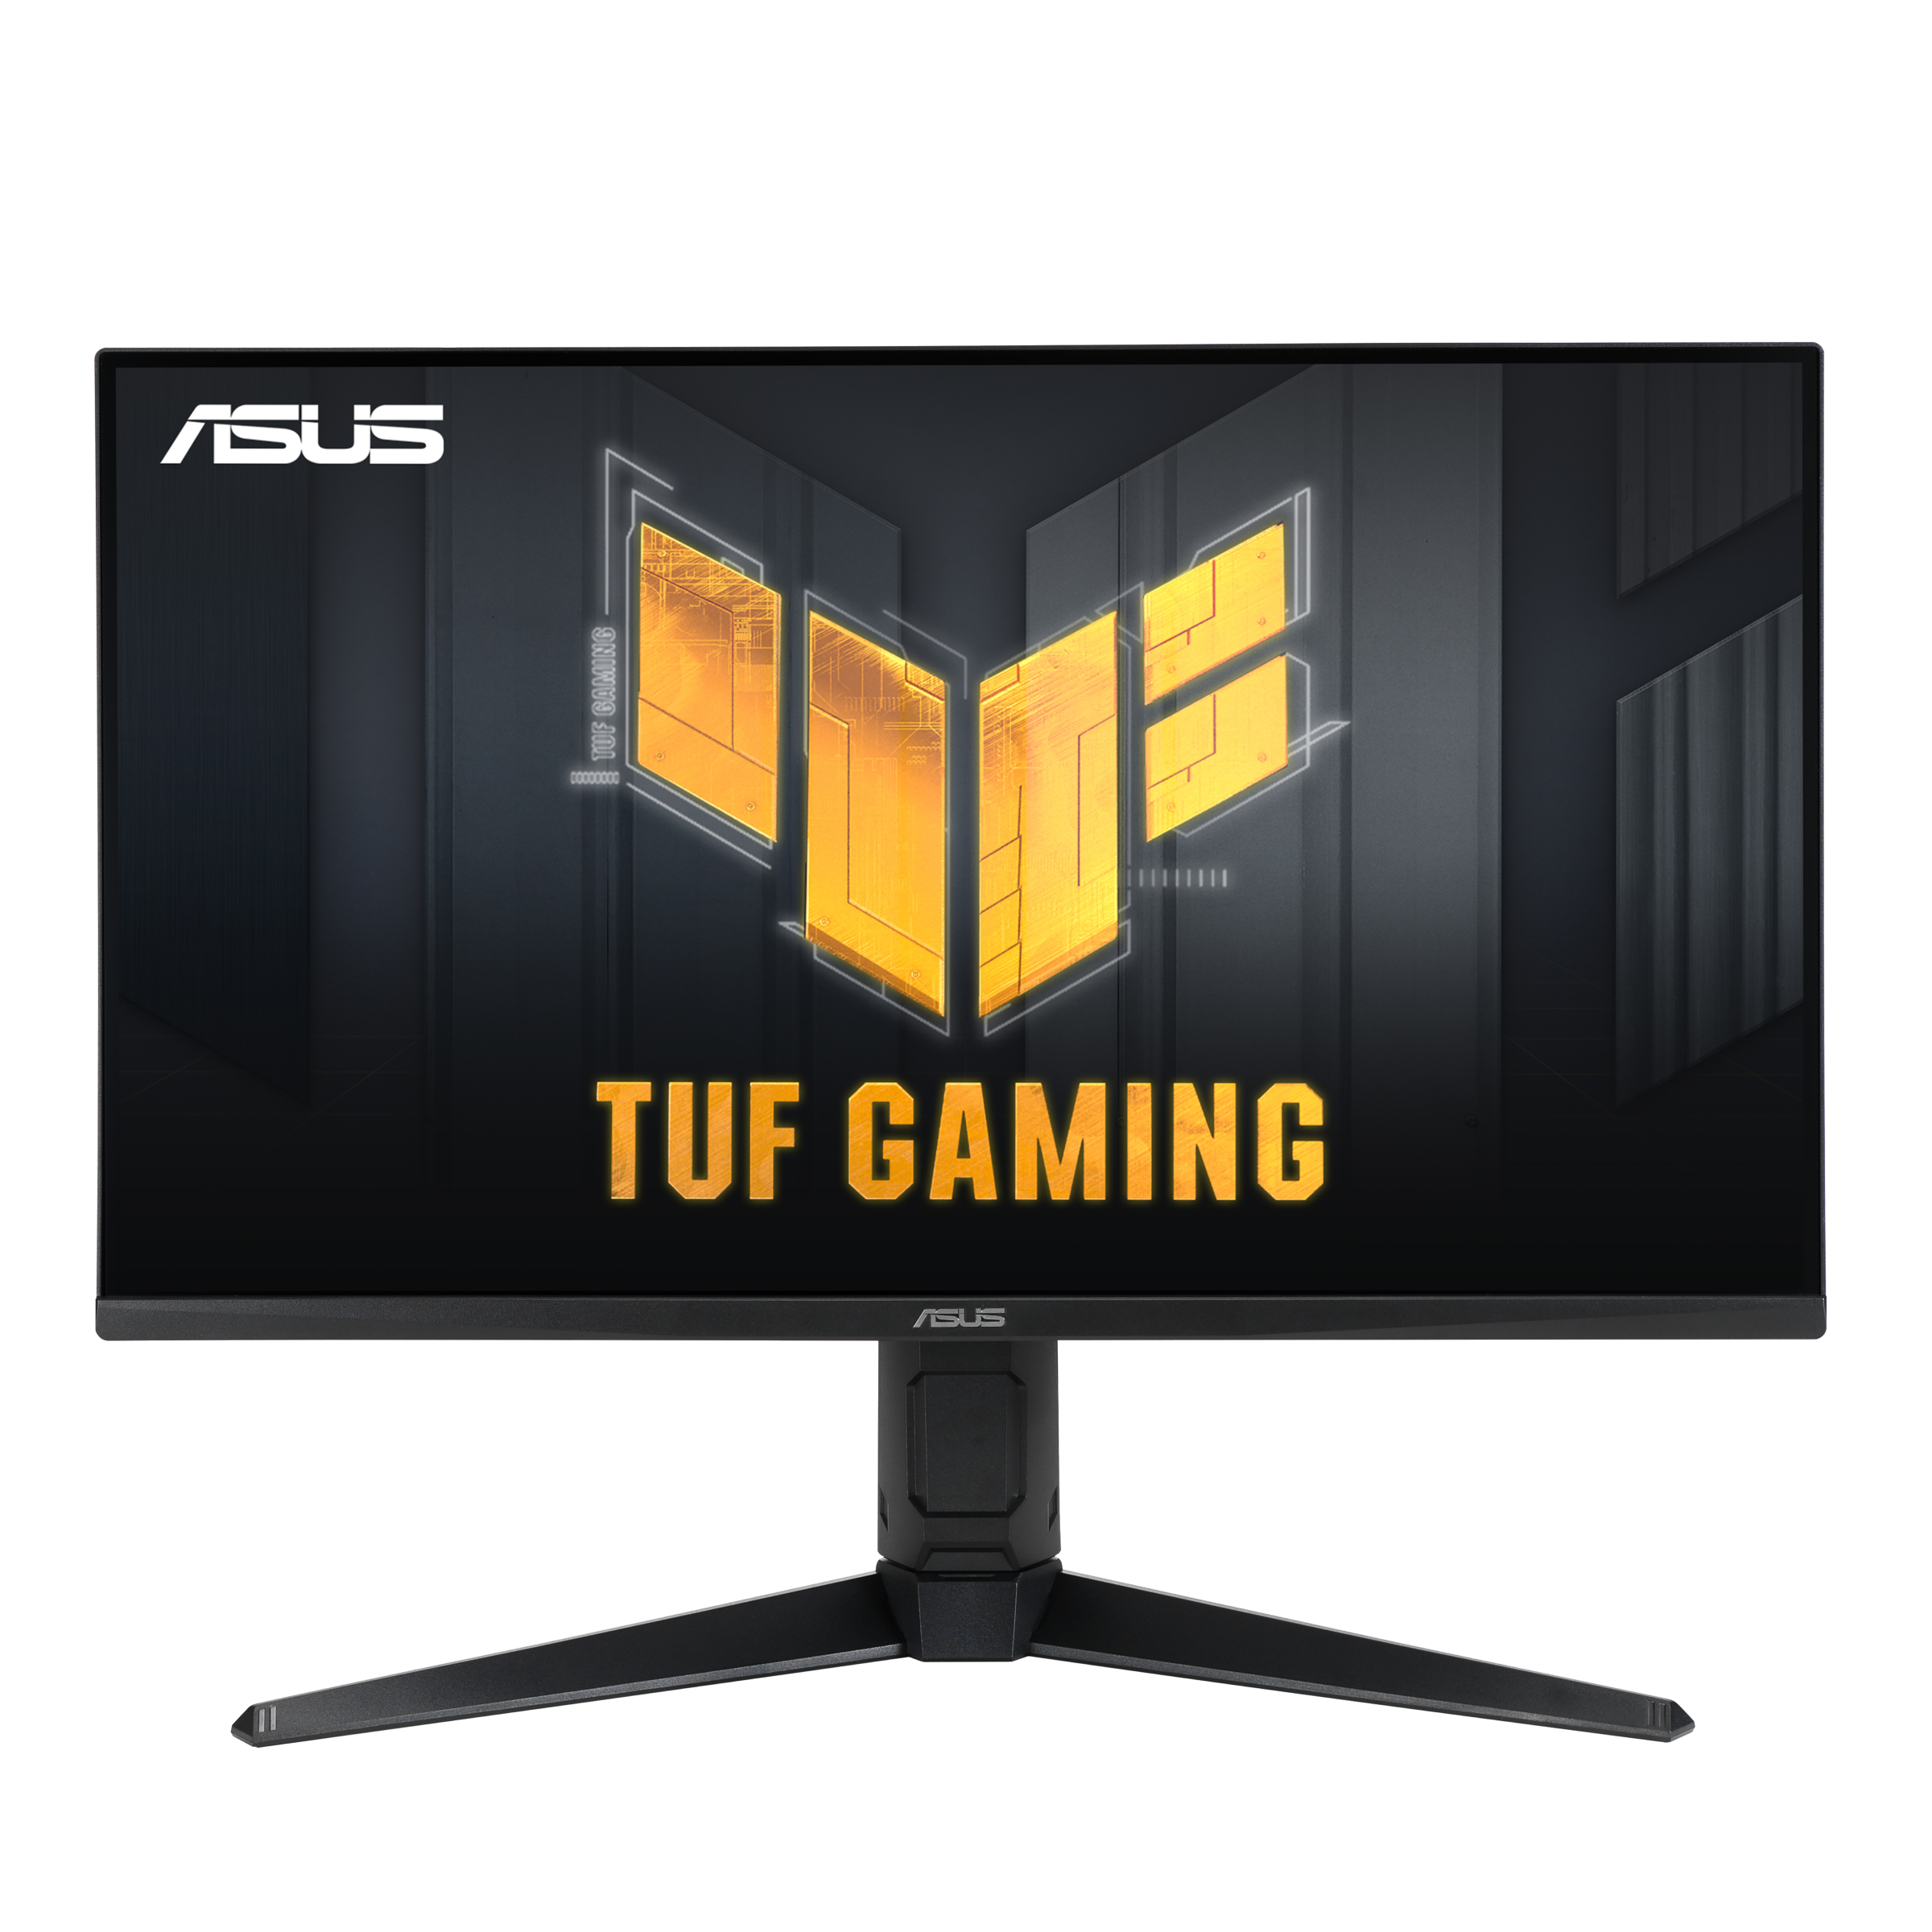 ASUS TUF Gaming 28" 4K 144Hz DSC HDMI 2.1 Gaming Monitor (VG28UQL1A) - UHD (3840 x 2160), Fast IPS, Extreme Low Motion Blur Sync, G-SYNC Compatible, FreeSync Premium, Eye Care, DCI-P3